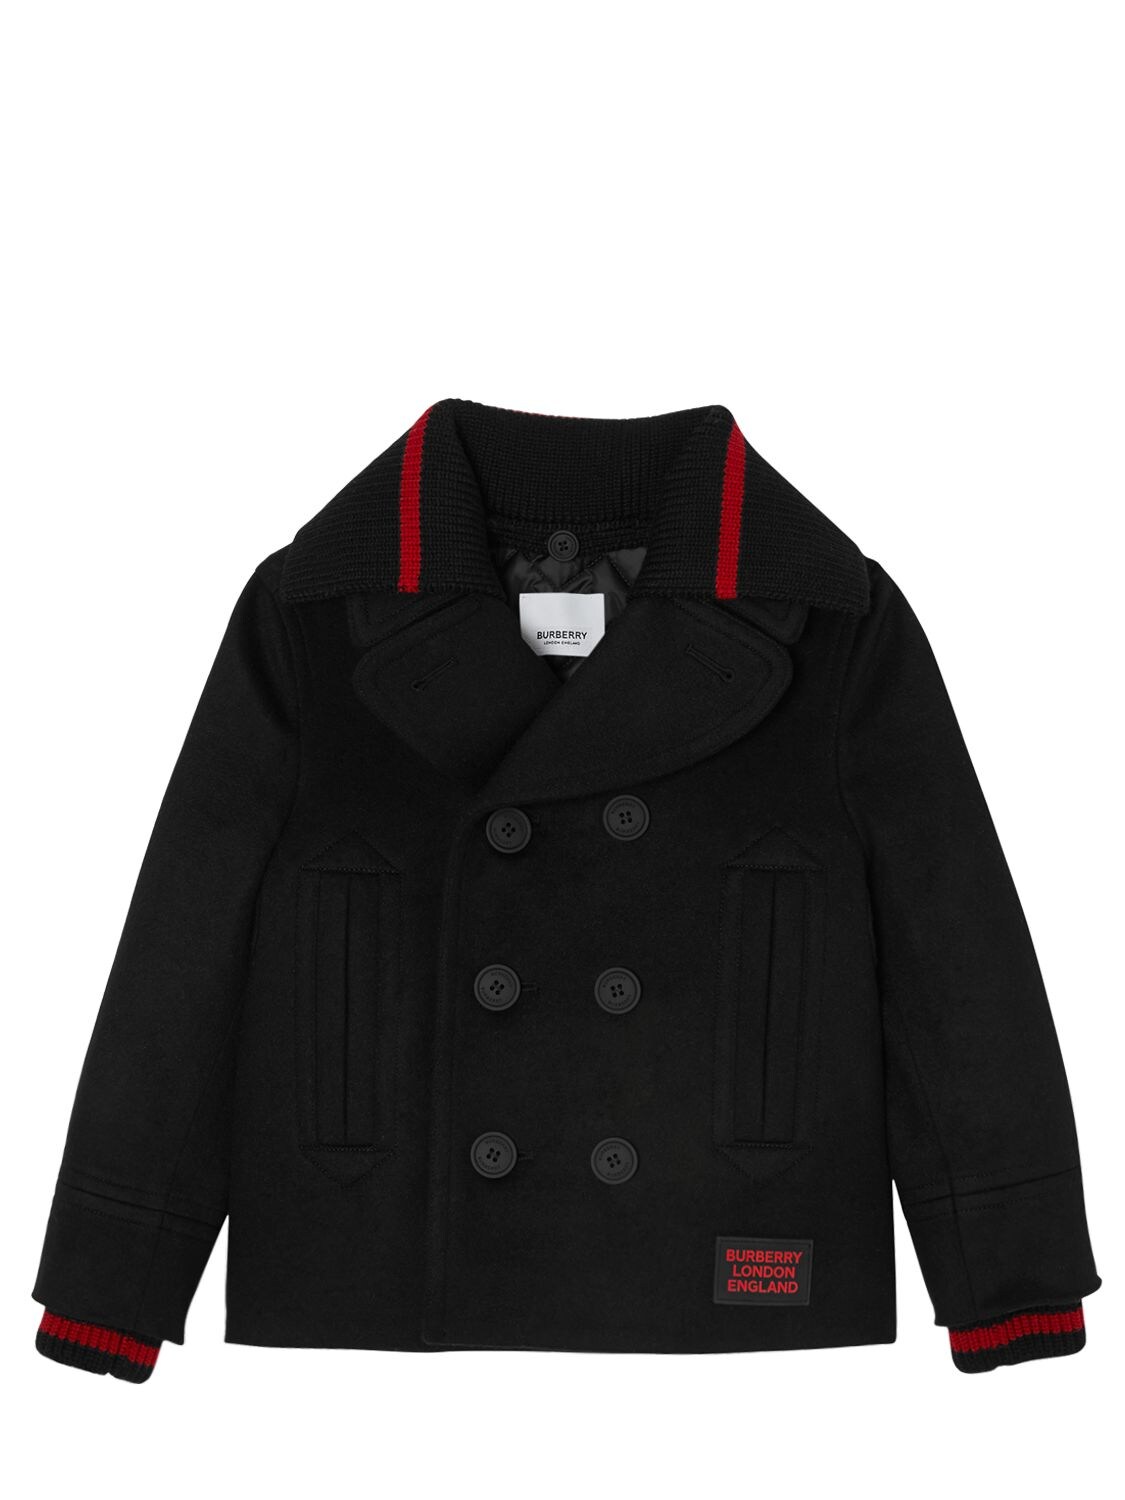 Burberry Kids' Double Breasted Wool Blend Jacket In Black